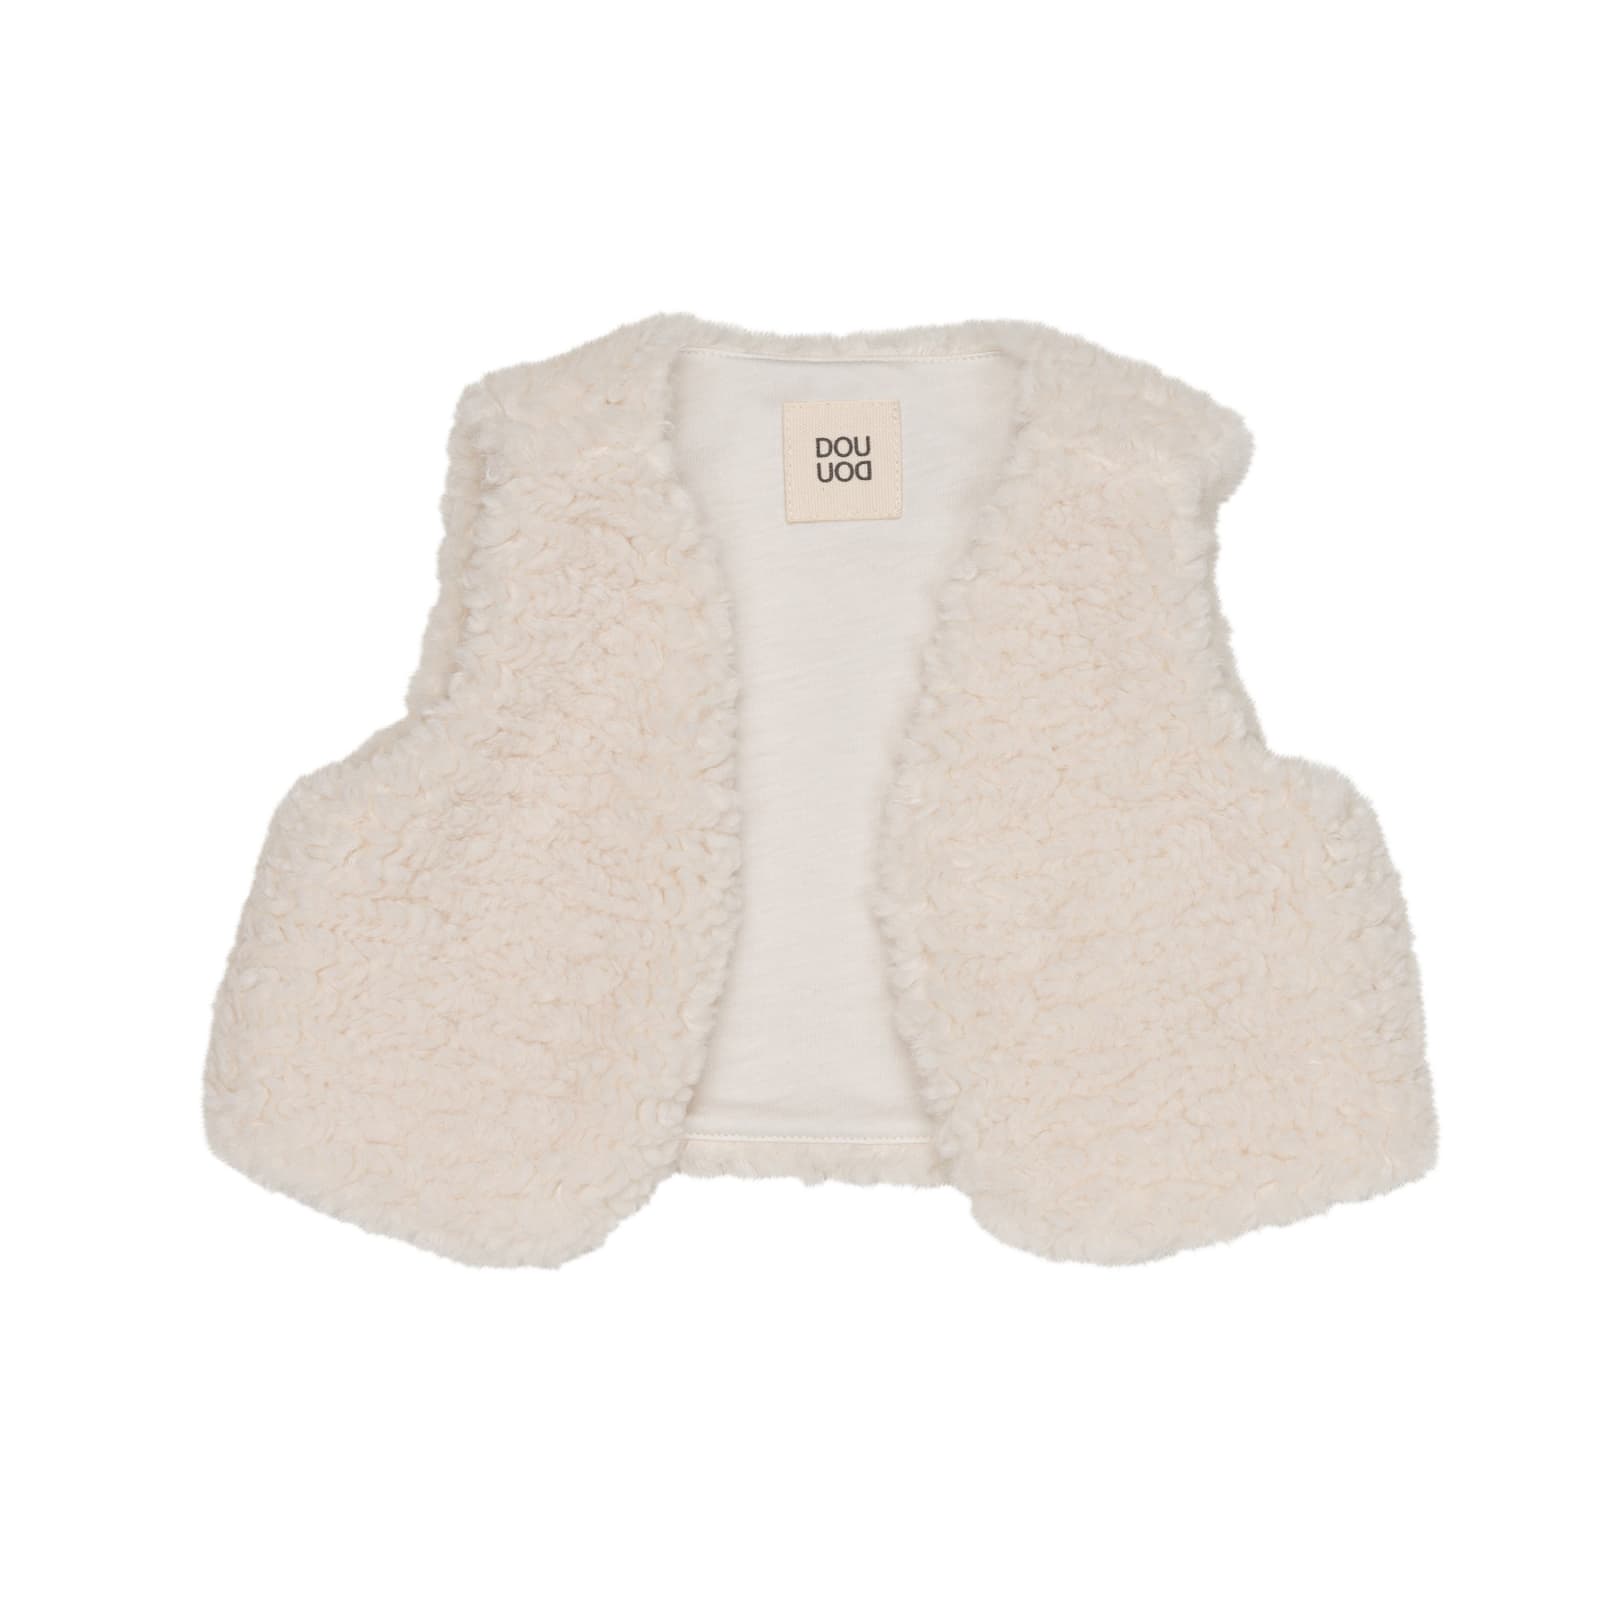 Douuod Babies' Brushed Effect Cotton Gilet In Crema